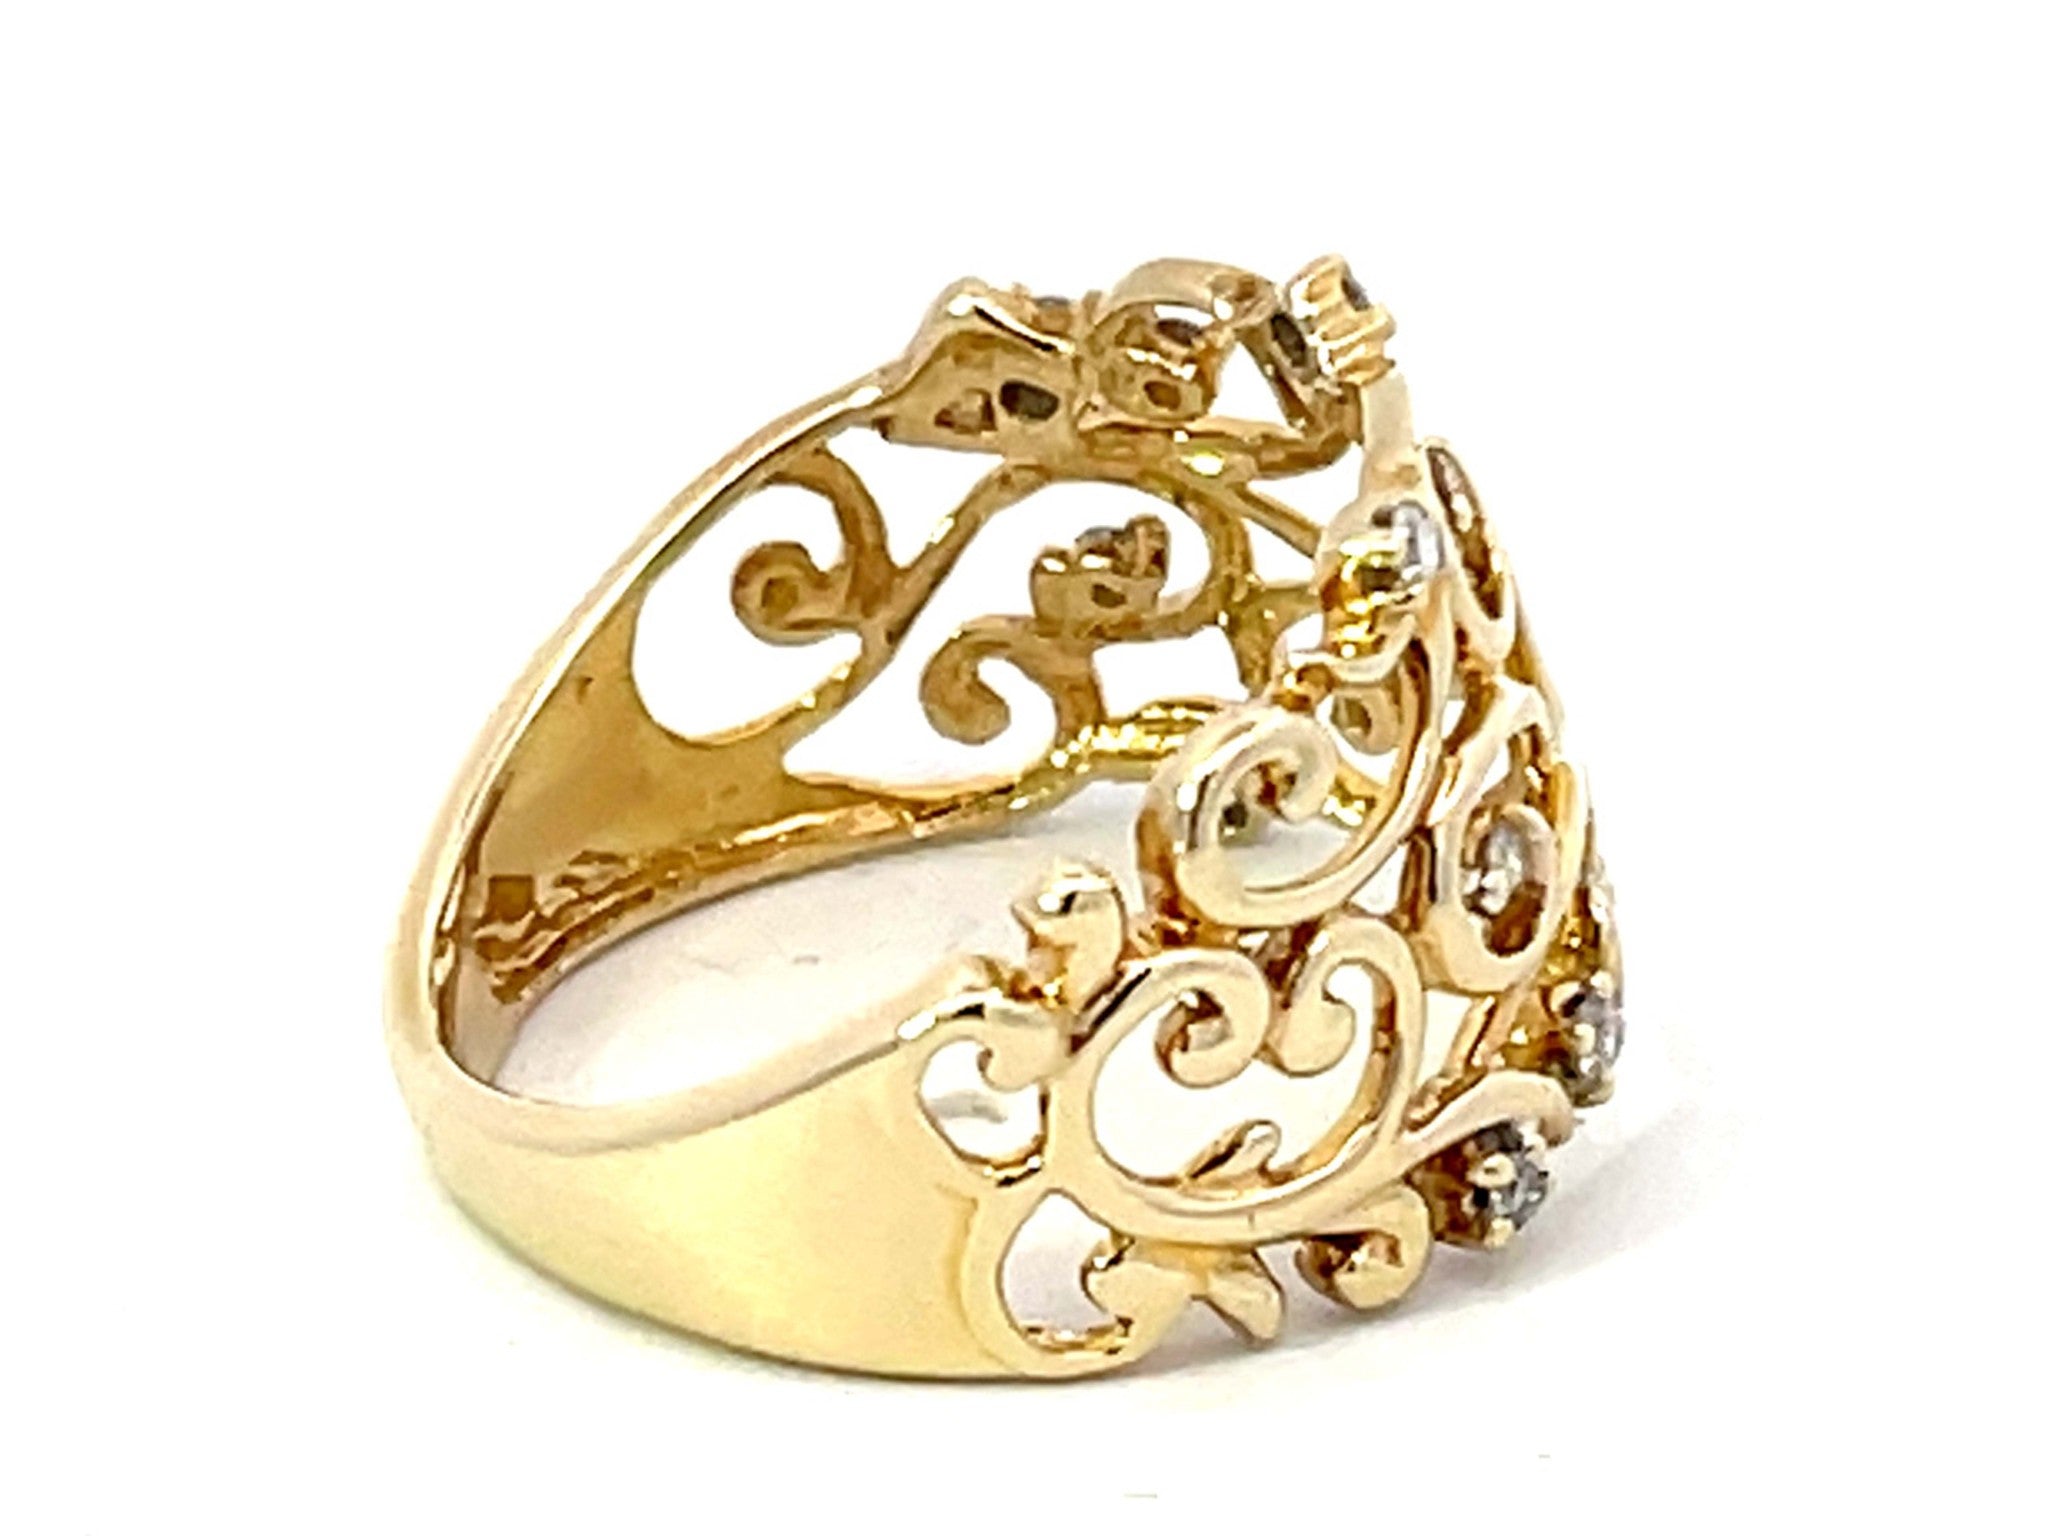 Diamond Open Work Wide Band Ring in 10K Yellow Gold